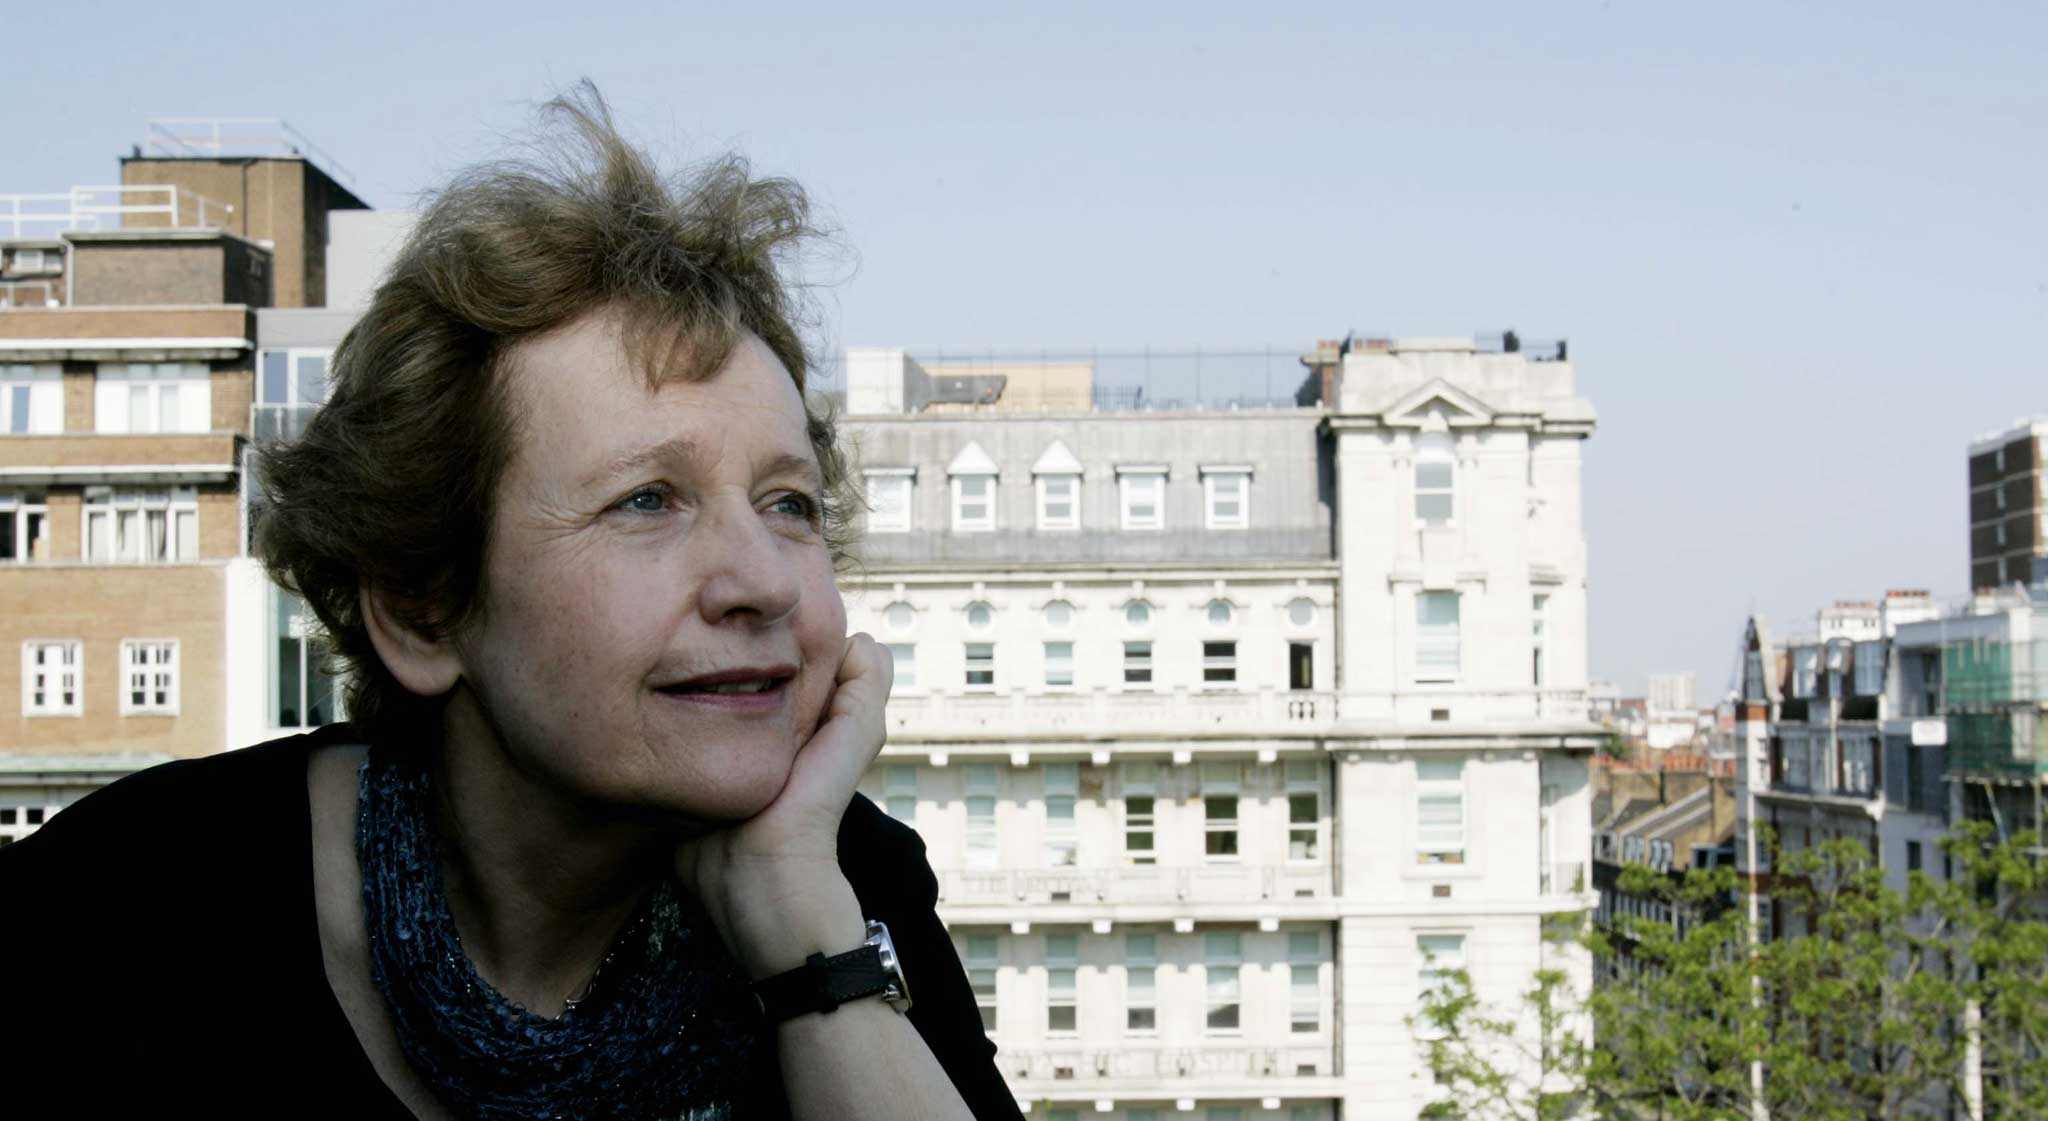 Insights: Wendy Cope's hybrid archive includes 40,000 emails